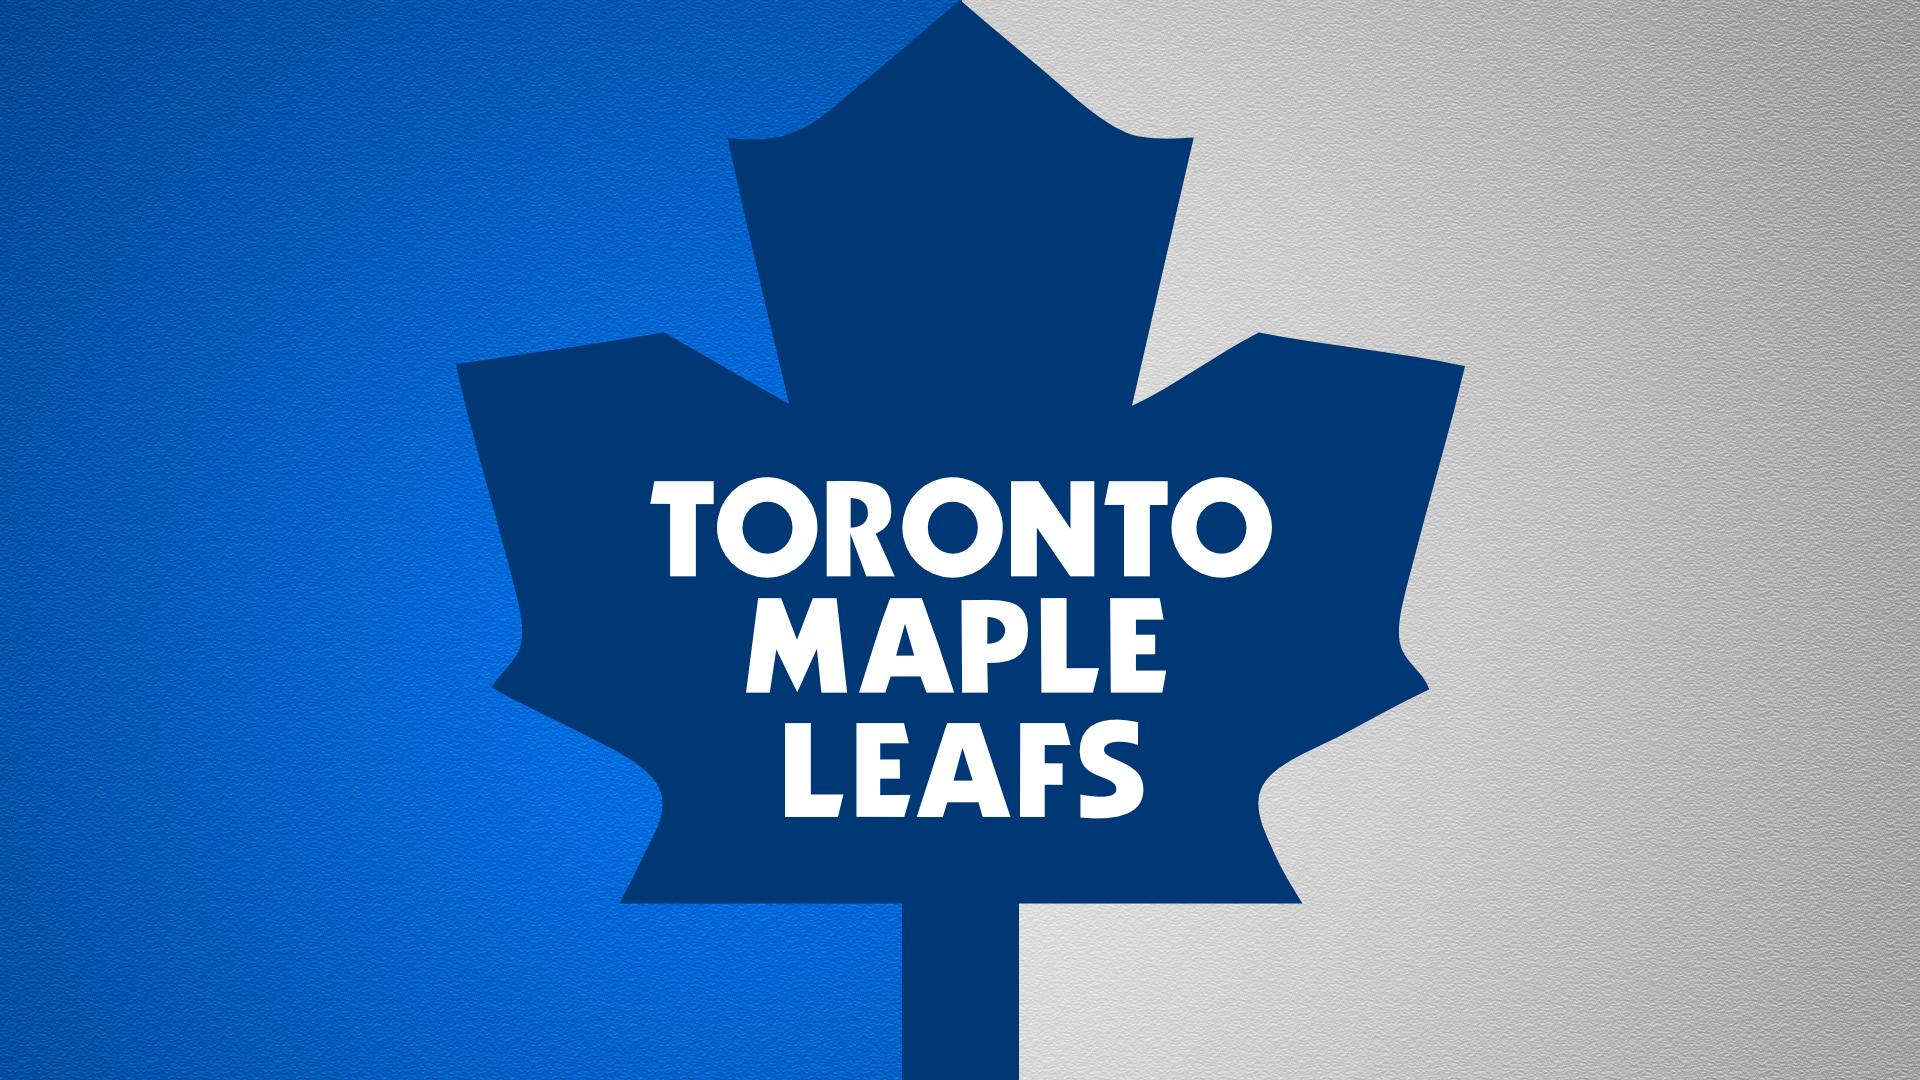 Background of the day: Toronto Maple Leafs. Toronto Maple Leafs